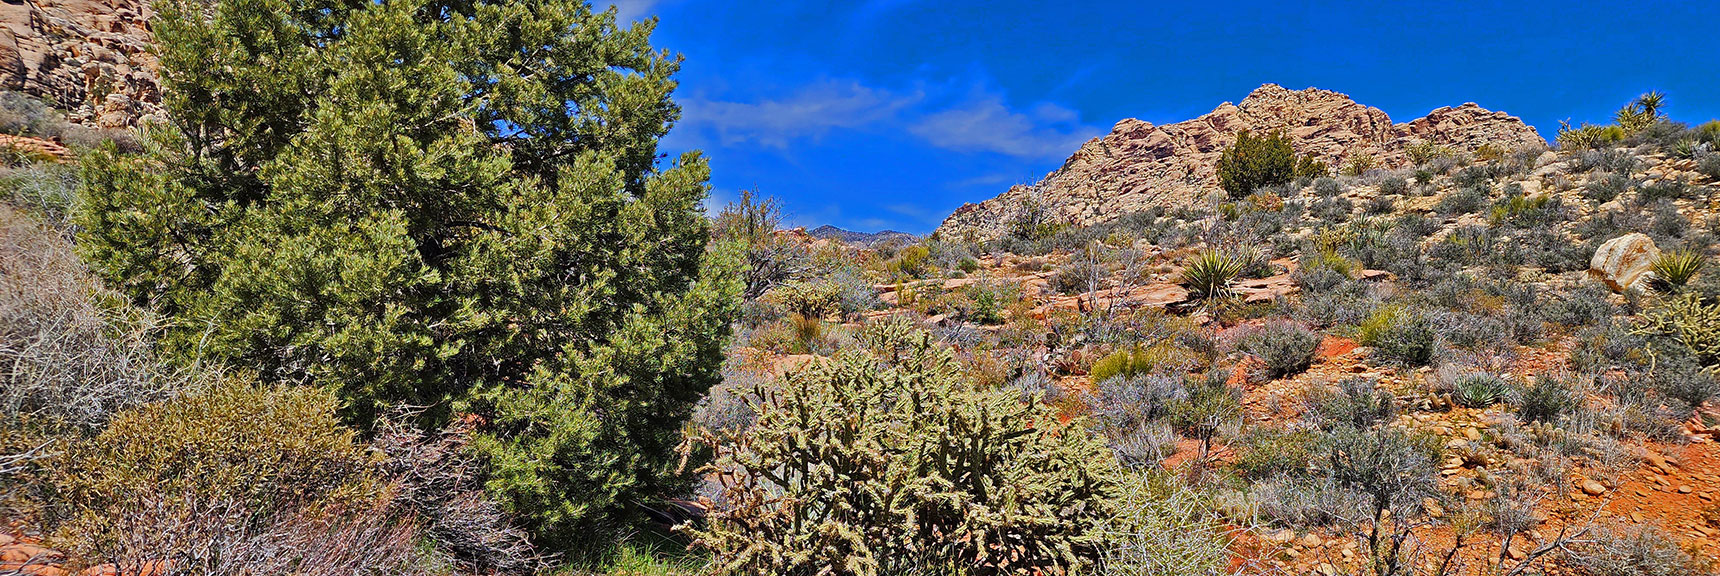 Scattered Pines, Juniper, Yucca and Cacti in This Arid Desert Environment | SMYC Trail | Red Rock Canyon National Conservation Area, Nevada | David Smith | LasVegasAreaTrails.com